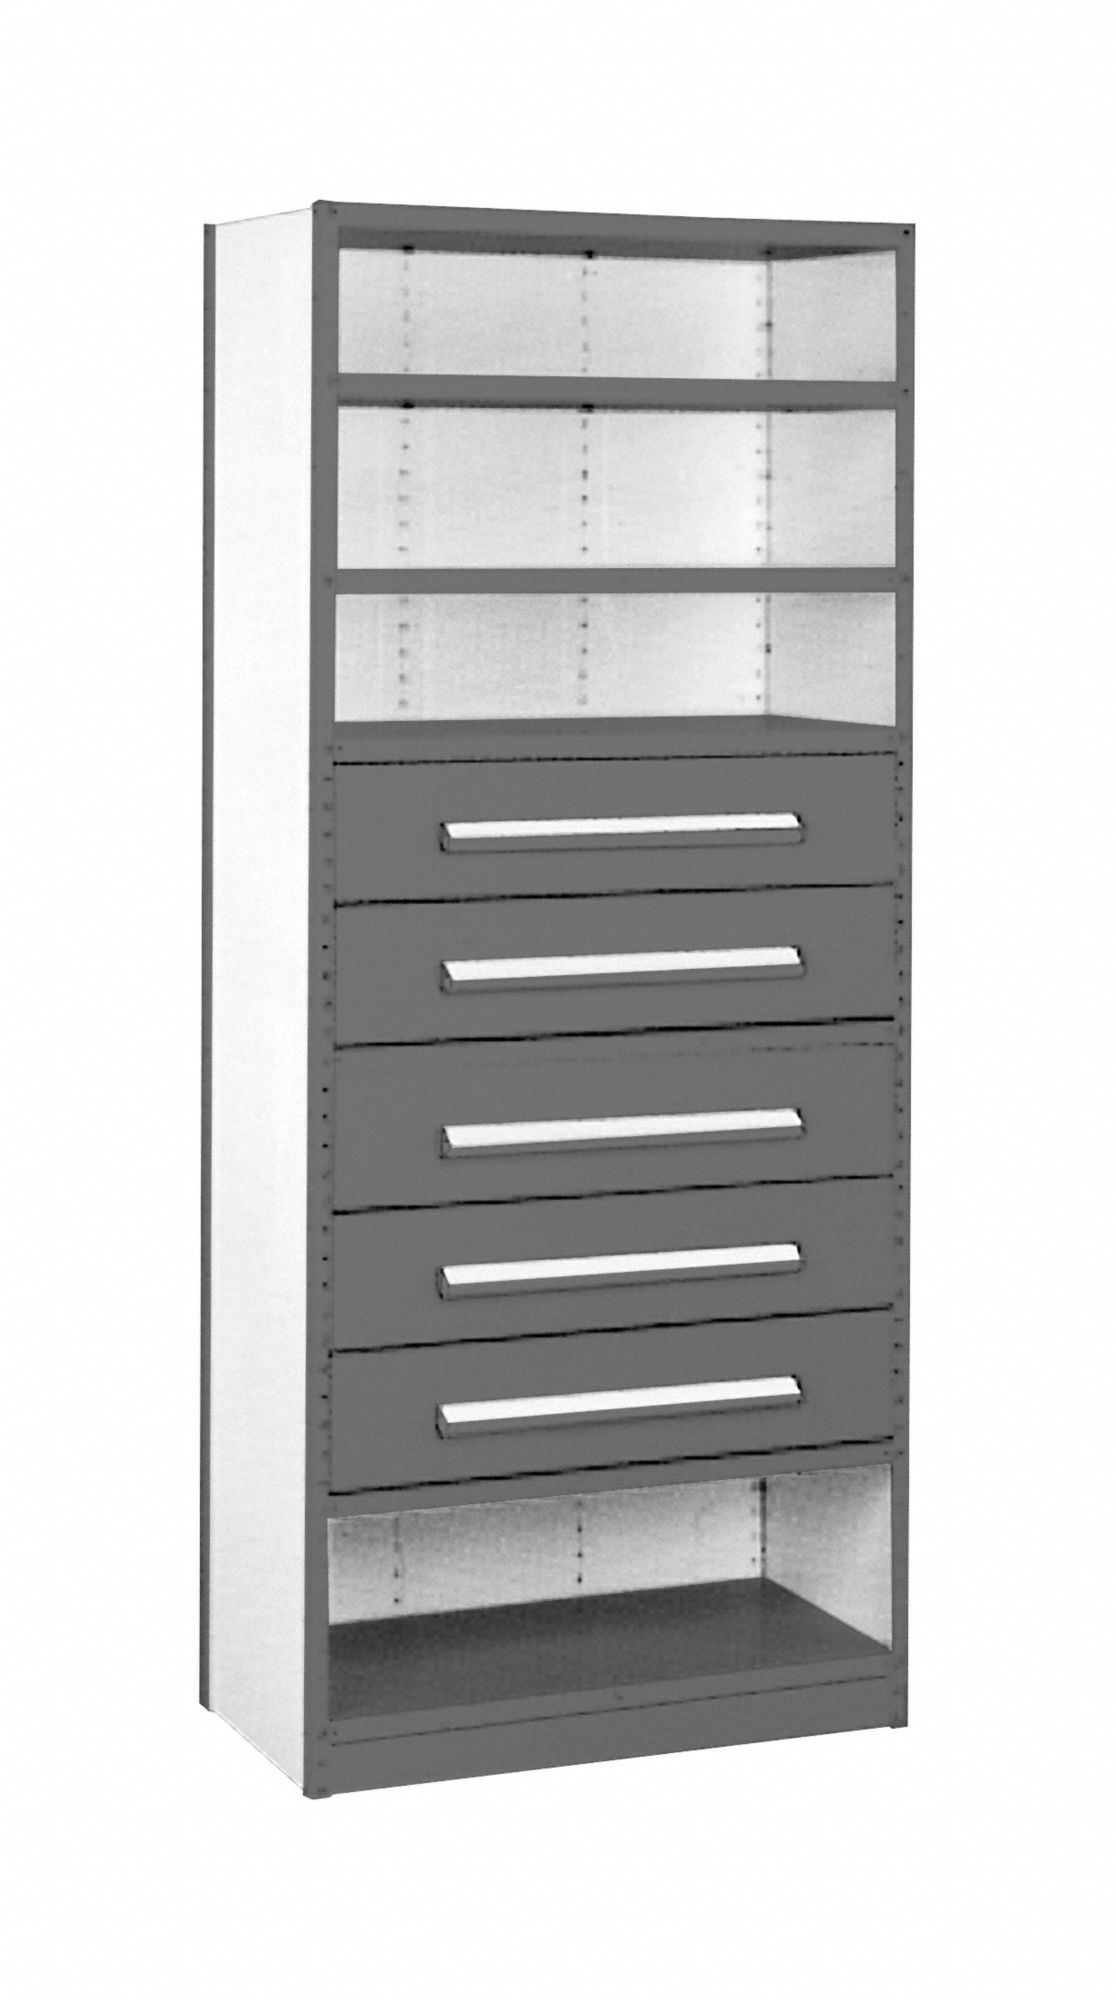 EQUIPTO Metal Shelving: Standalone, Heavy-Duty, 36 in x 18 in, 84 in  Overall Ht, 4 Shelves, 7 1/2 in